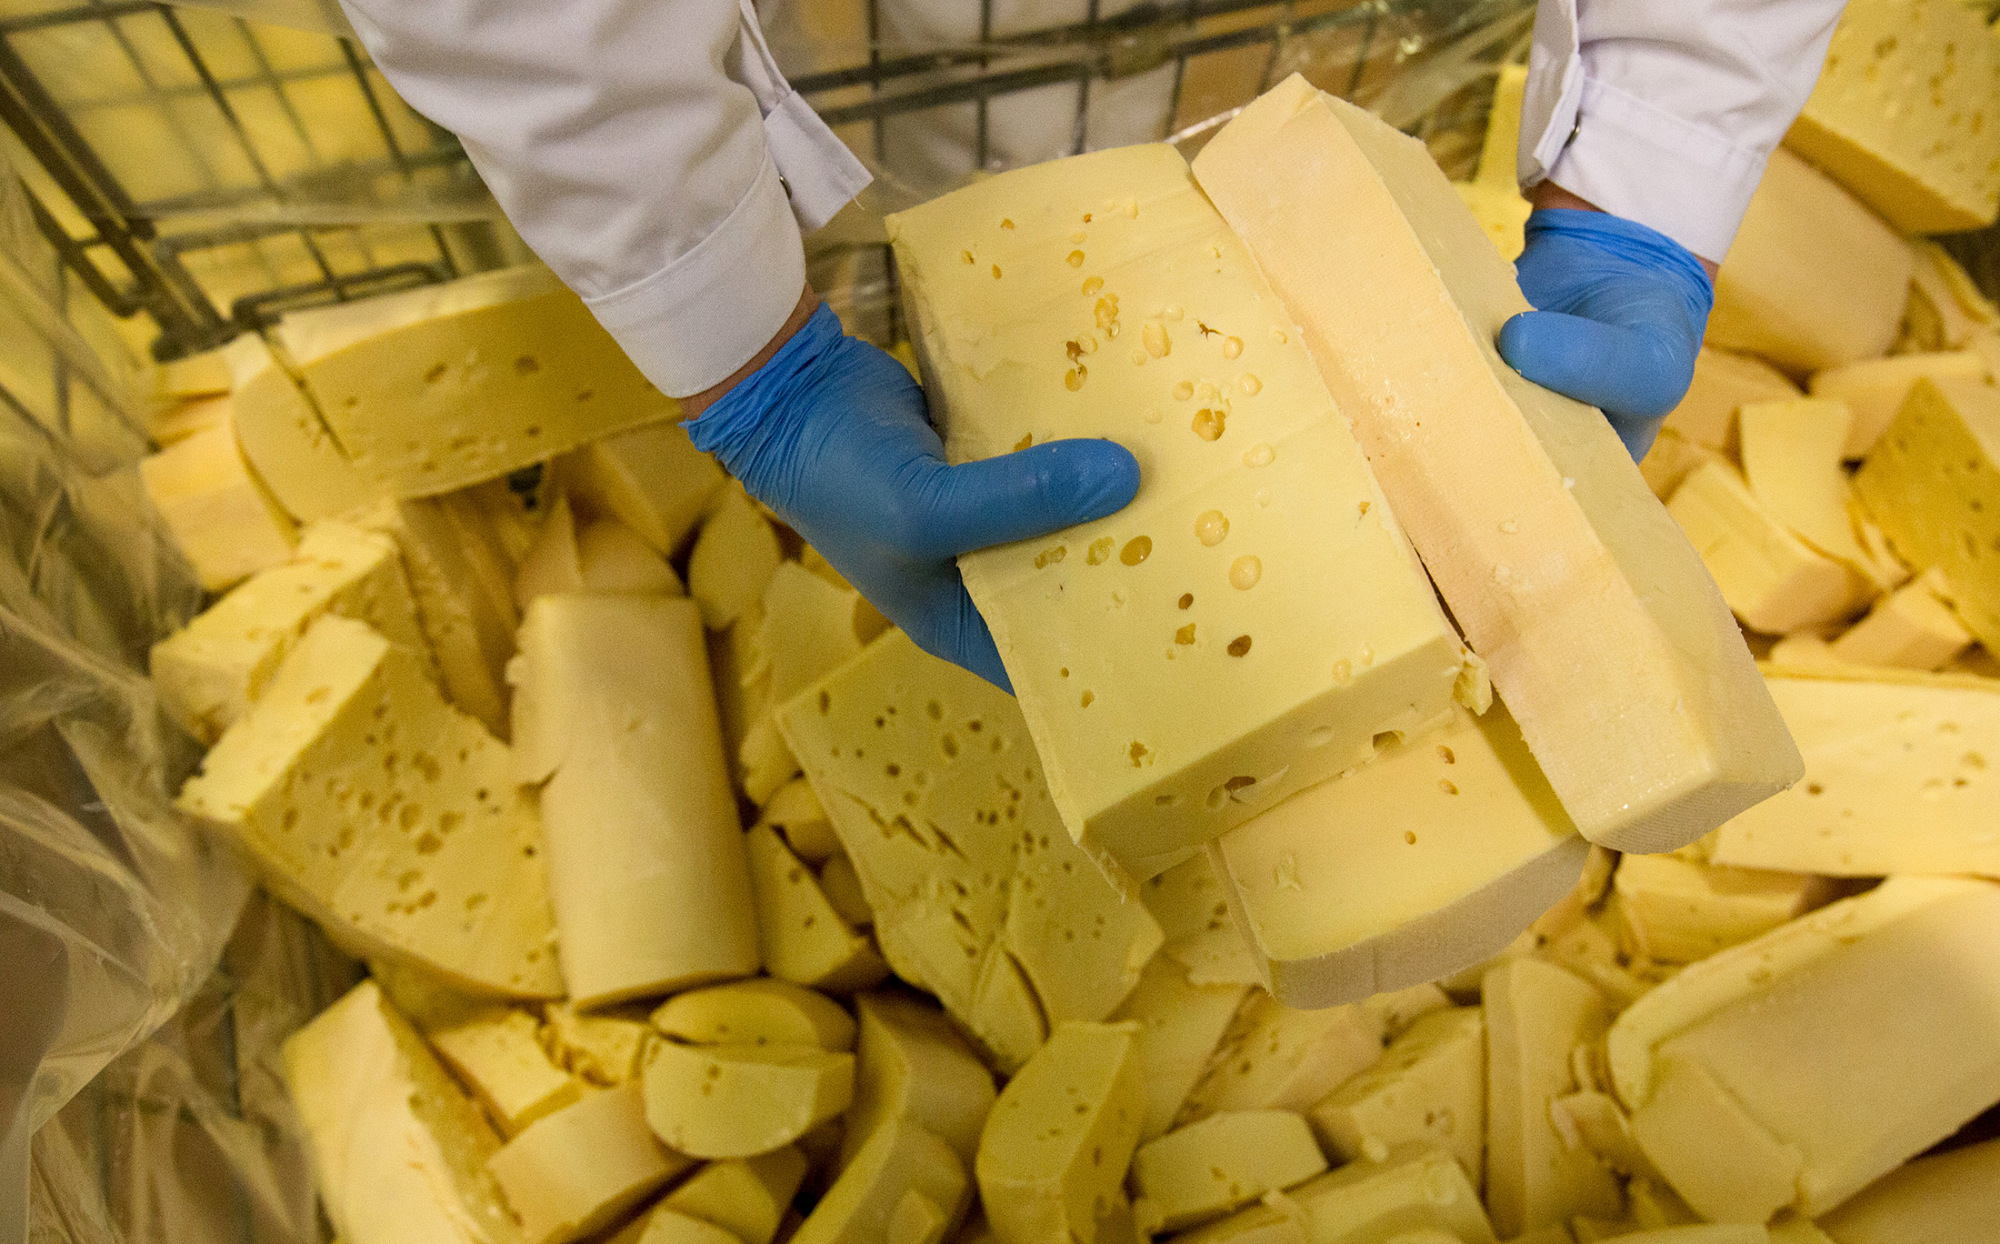 A worker separates lumps of Viola cheese before processing on the production line at the Valio Oy cheese manufacturing plant in Yershovo, Russia, on Dec. 8, 2015
